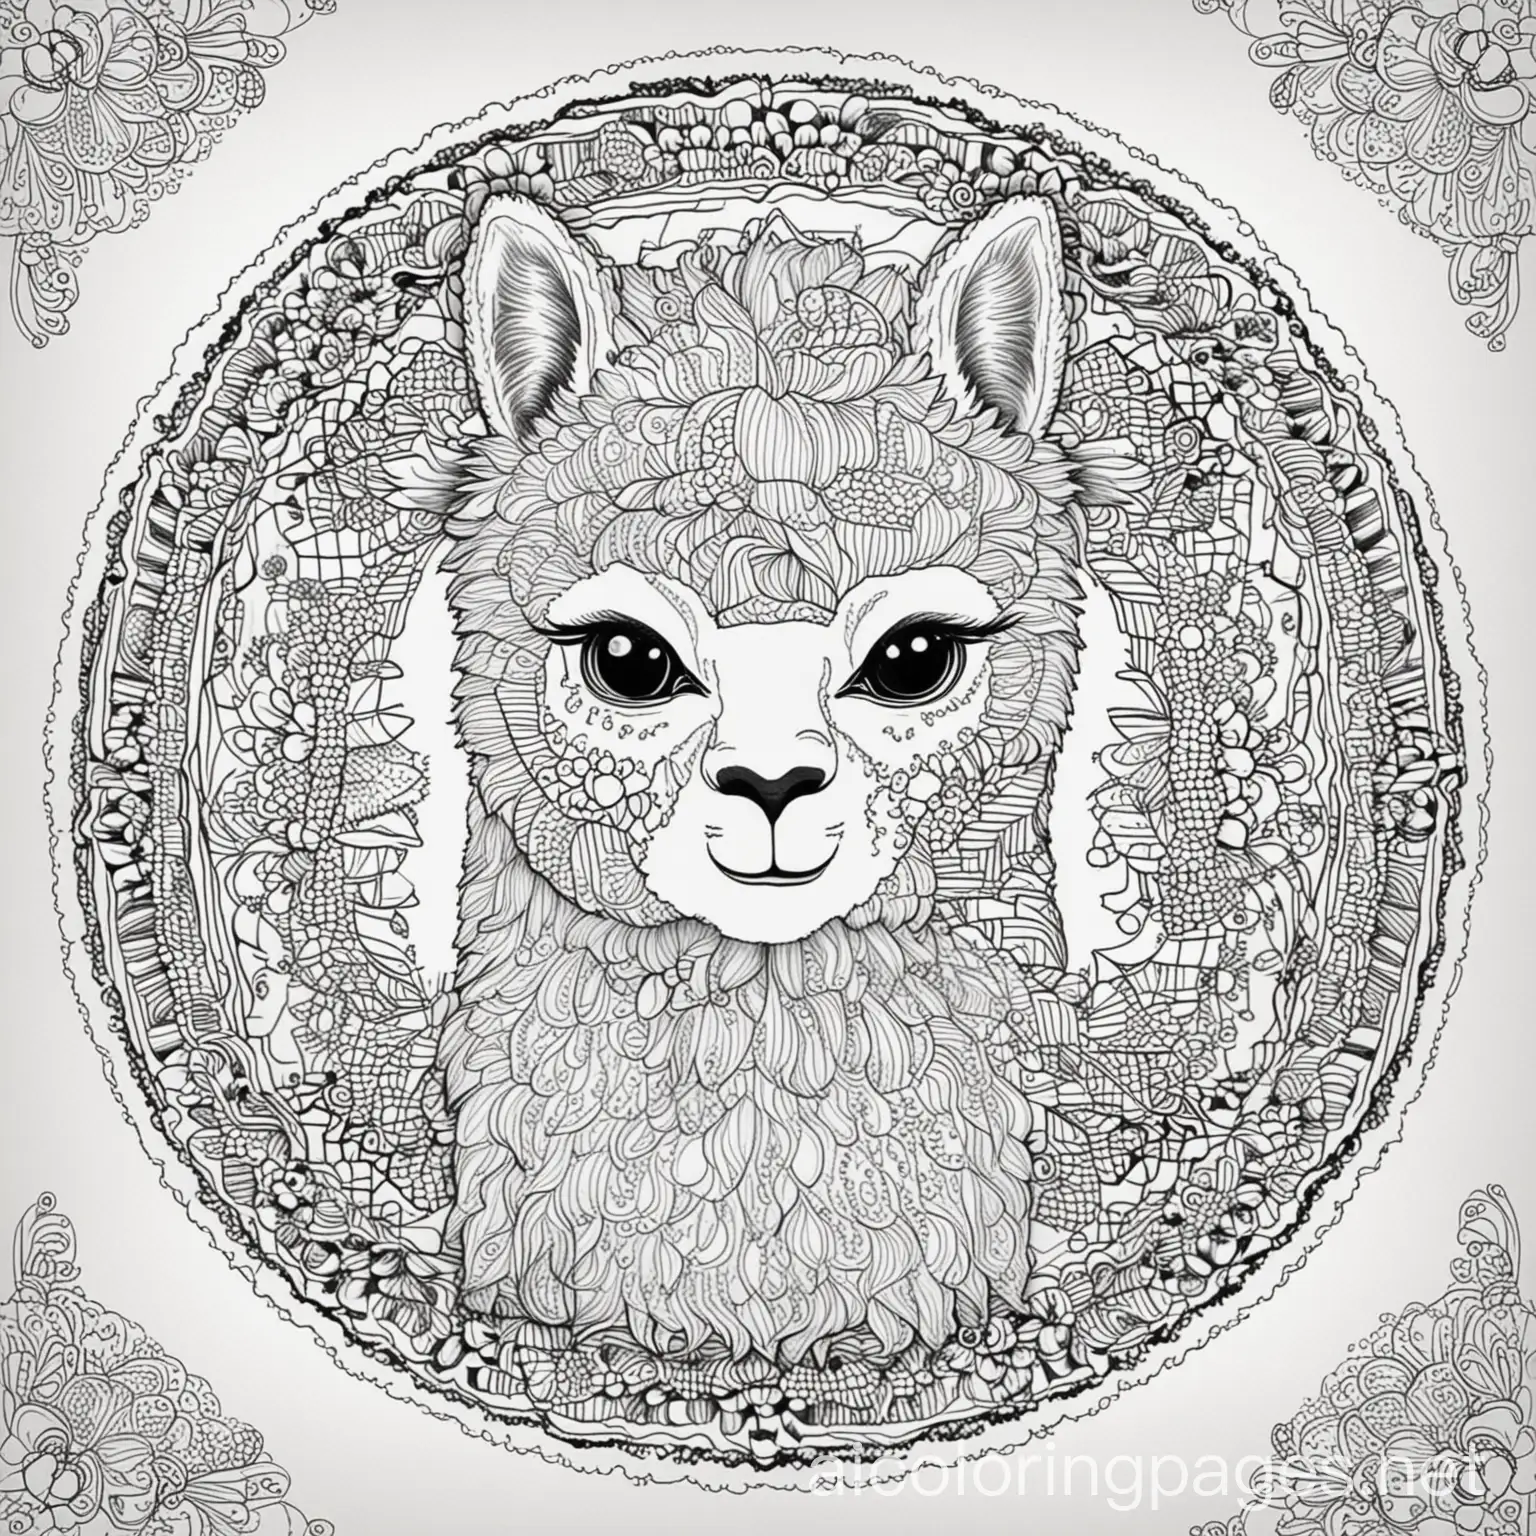 A Alpaca with vivid pattern inside of it, mandala design, coloring book photo, thick lines, no dots, just outline,, Coloring Page, black and white, line art, white background, vivid graphics, Mandela, Ample White Space. The background of the coloring page is plain white to make it hard for seniors to color within the lines. The outlines of all the subjects are easy to distinguish, making much difficulty., Coloring Page, black and white, line art, white background, Simplicity, Ample White Space. The background of the coloring page is plain white to make it easy for young children to color within the lines. The outlines of all the subjects are easy to distinguish, making it simple for kids to color without too much difficulty